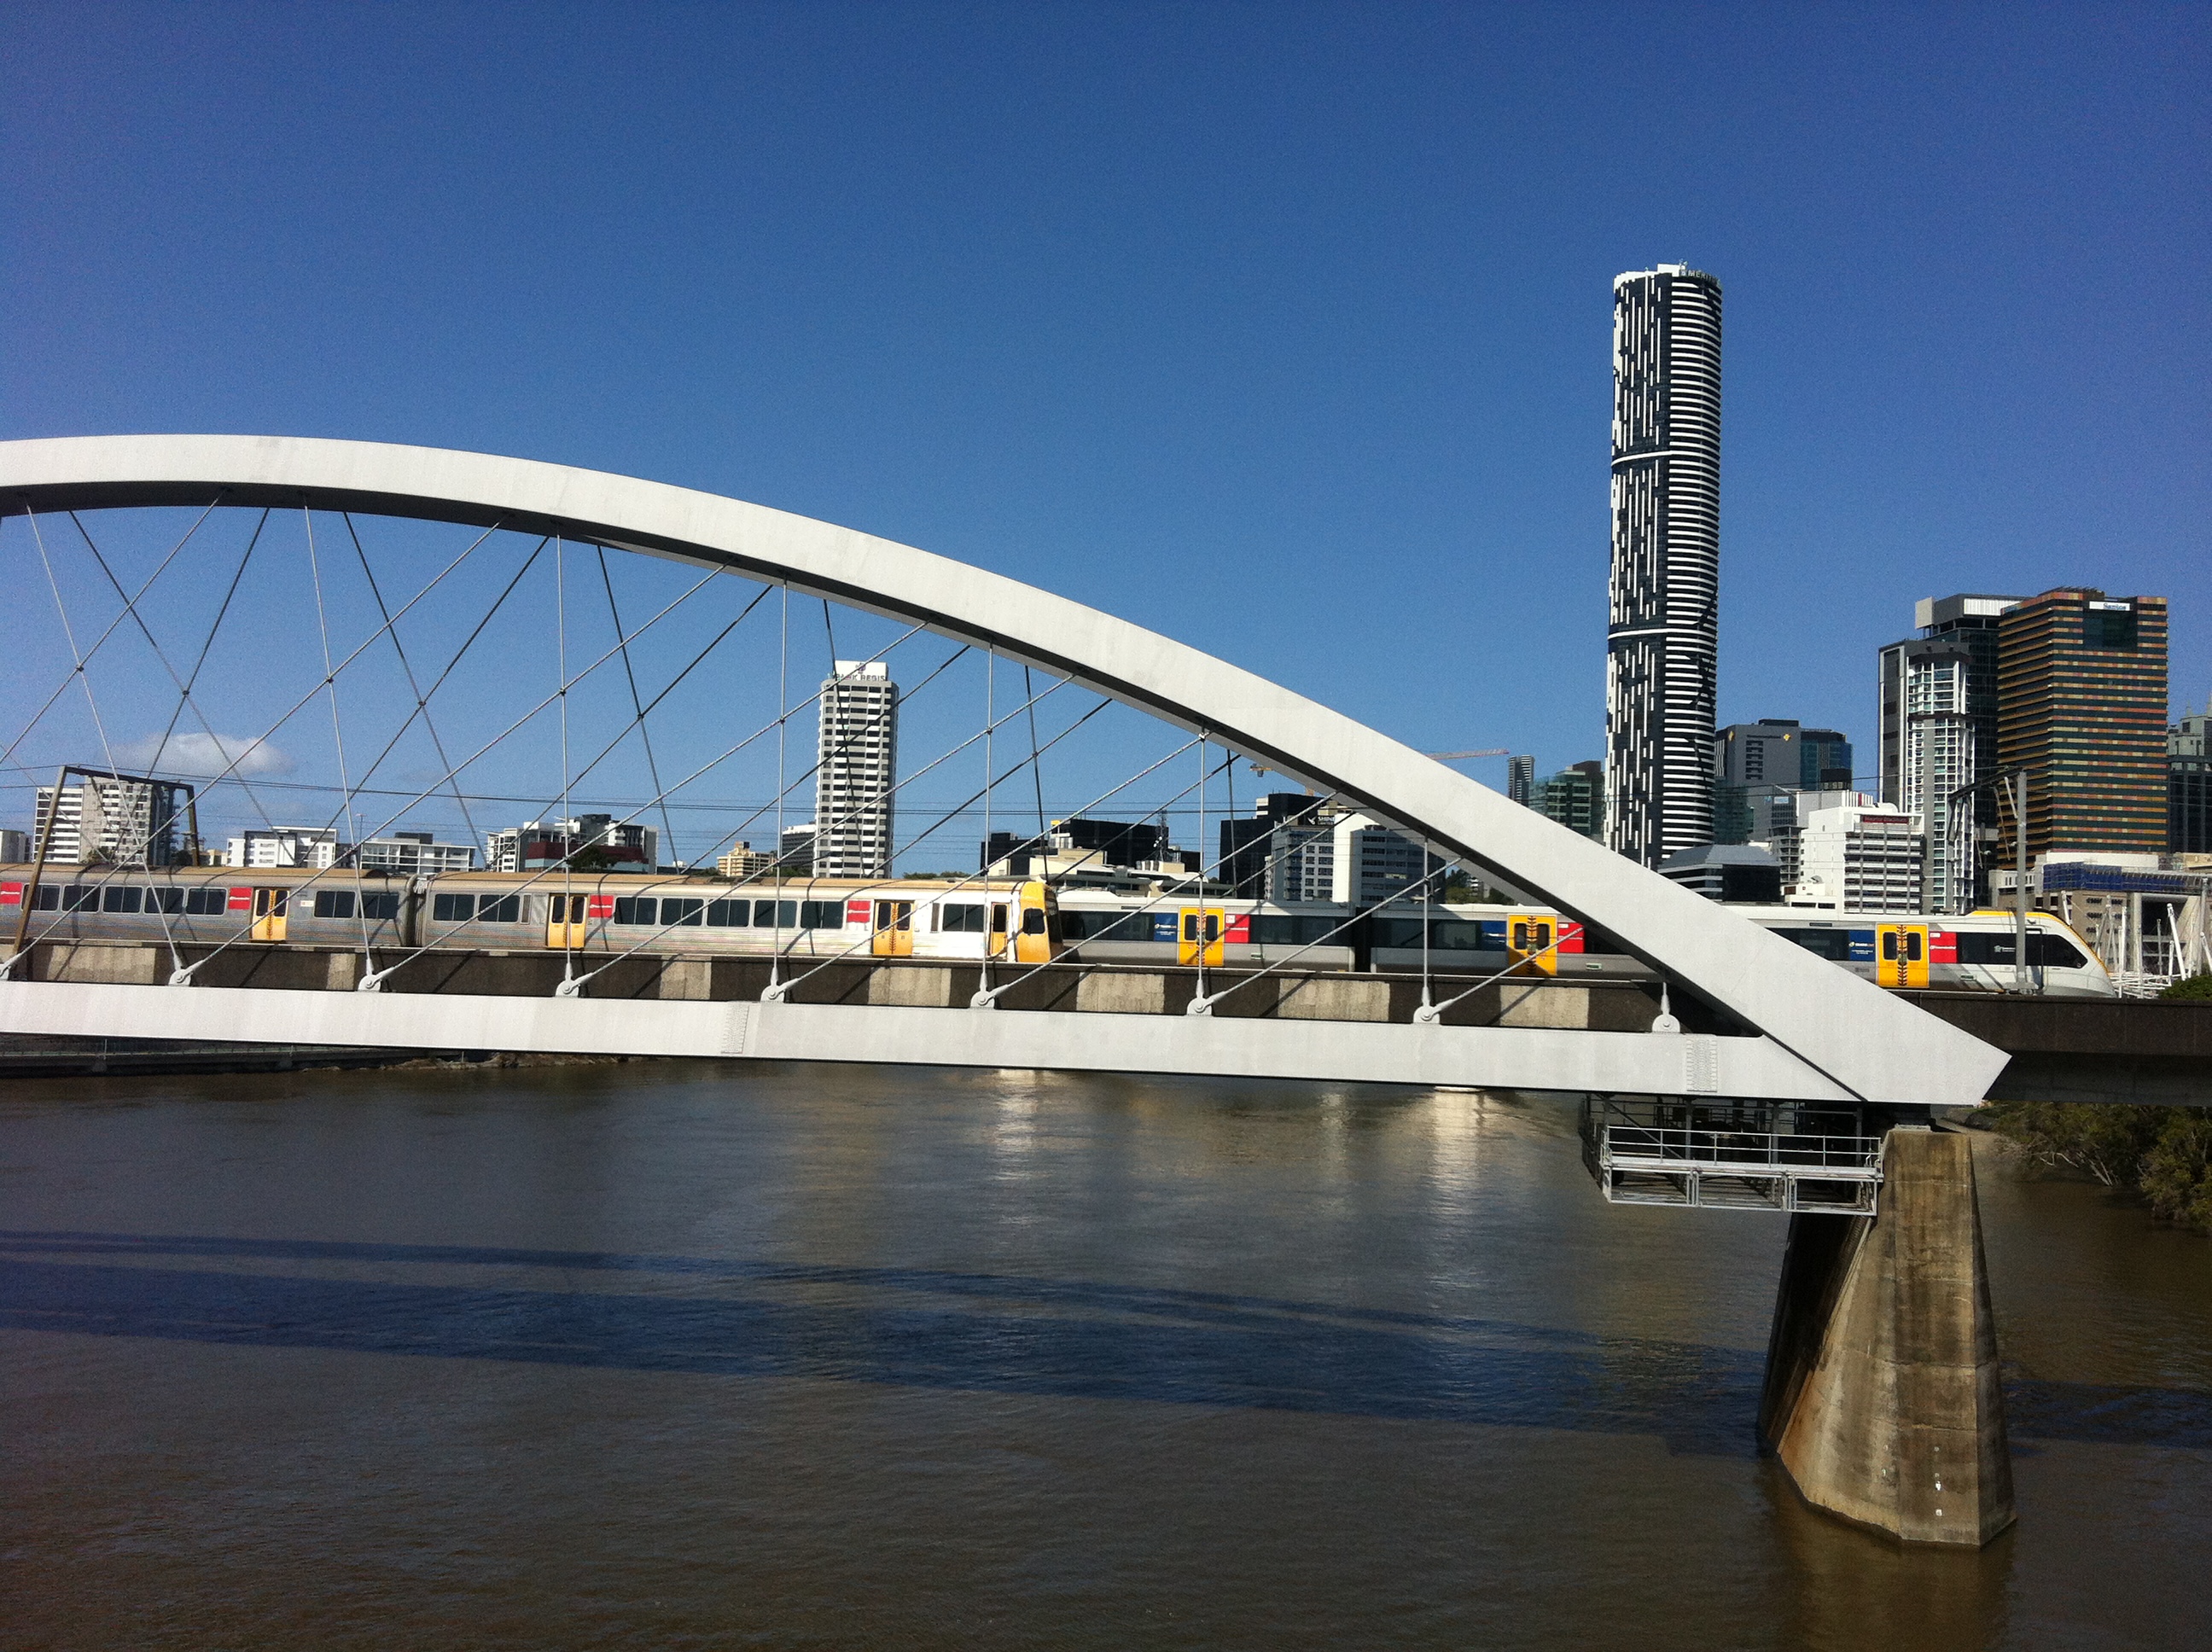 Two trains passing each other on the Merrivale bridge over the Brisbane river.